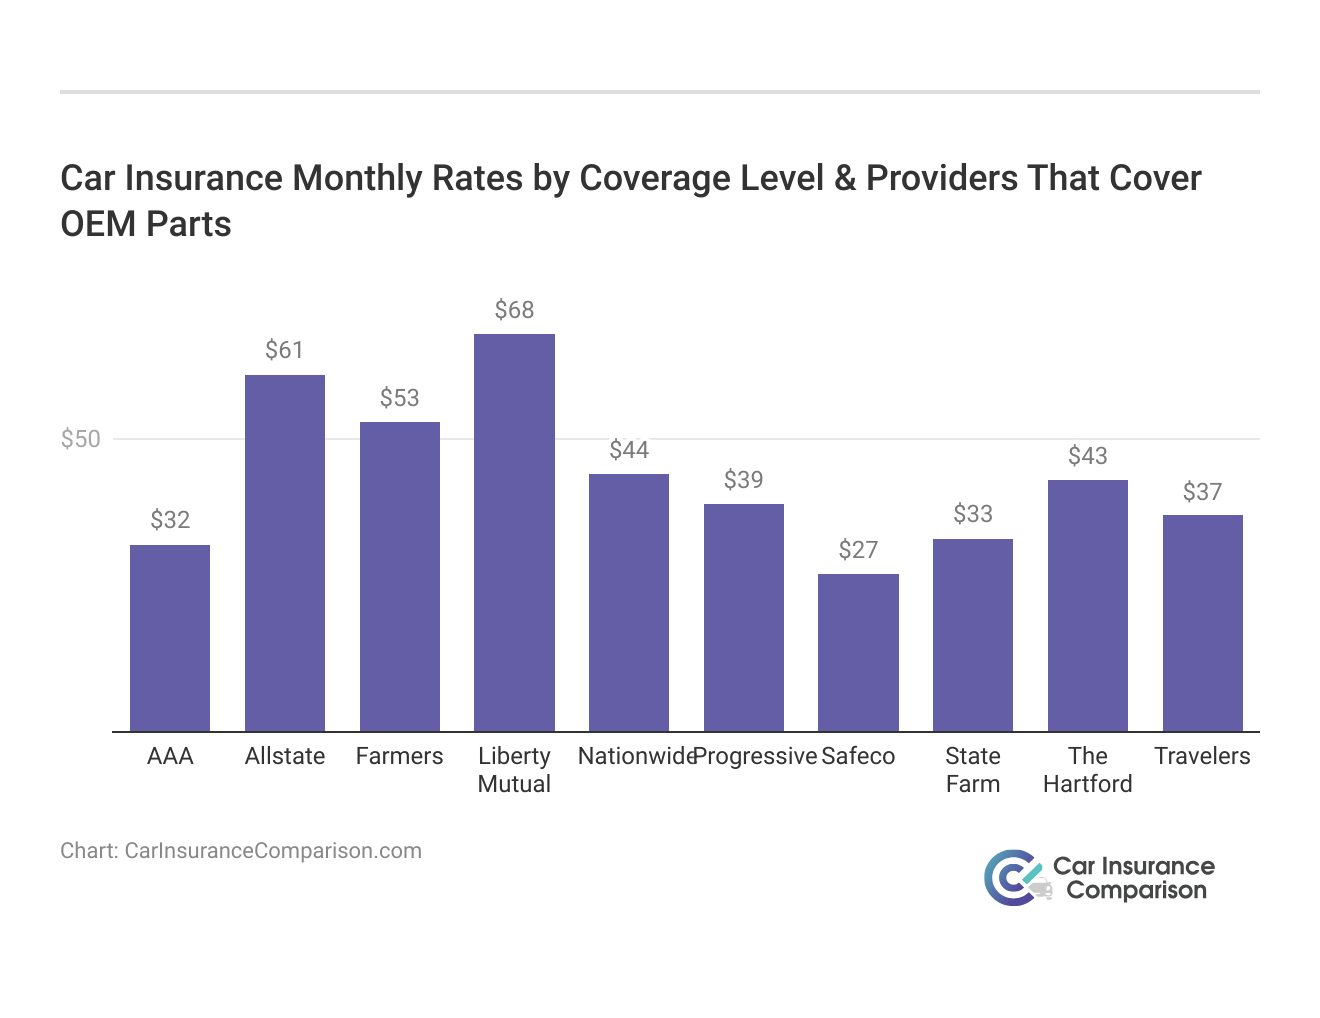 <h3>Car Insurance Monthly Rates by Coverage Level & Providers That Cover OEM Parts</h3>